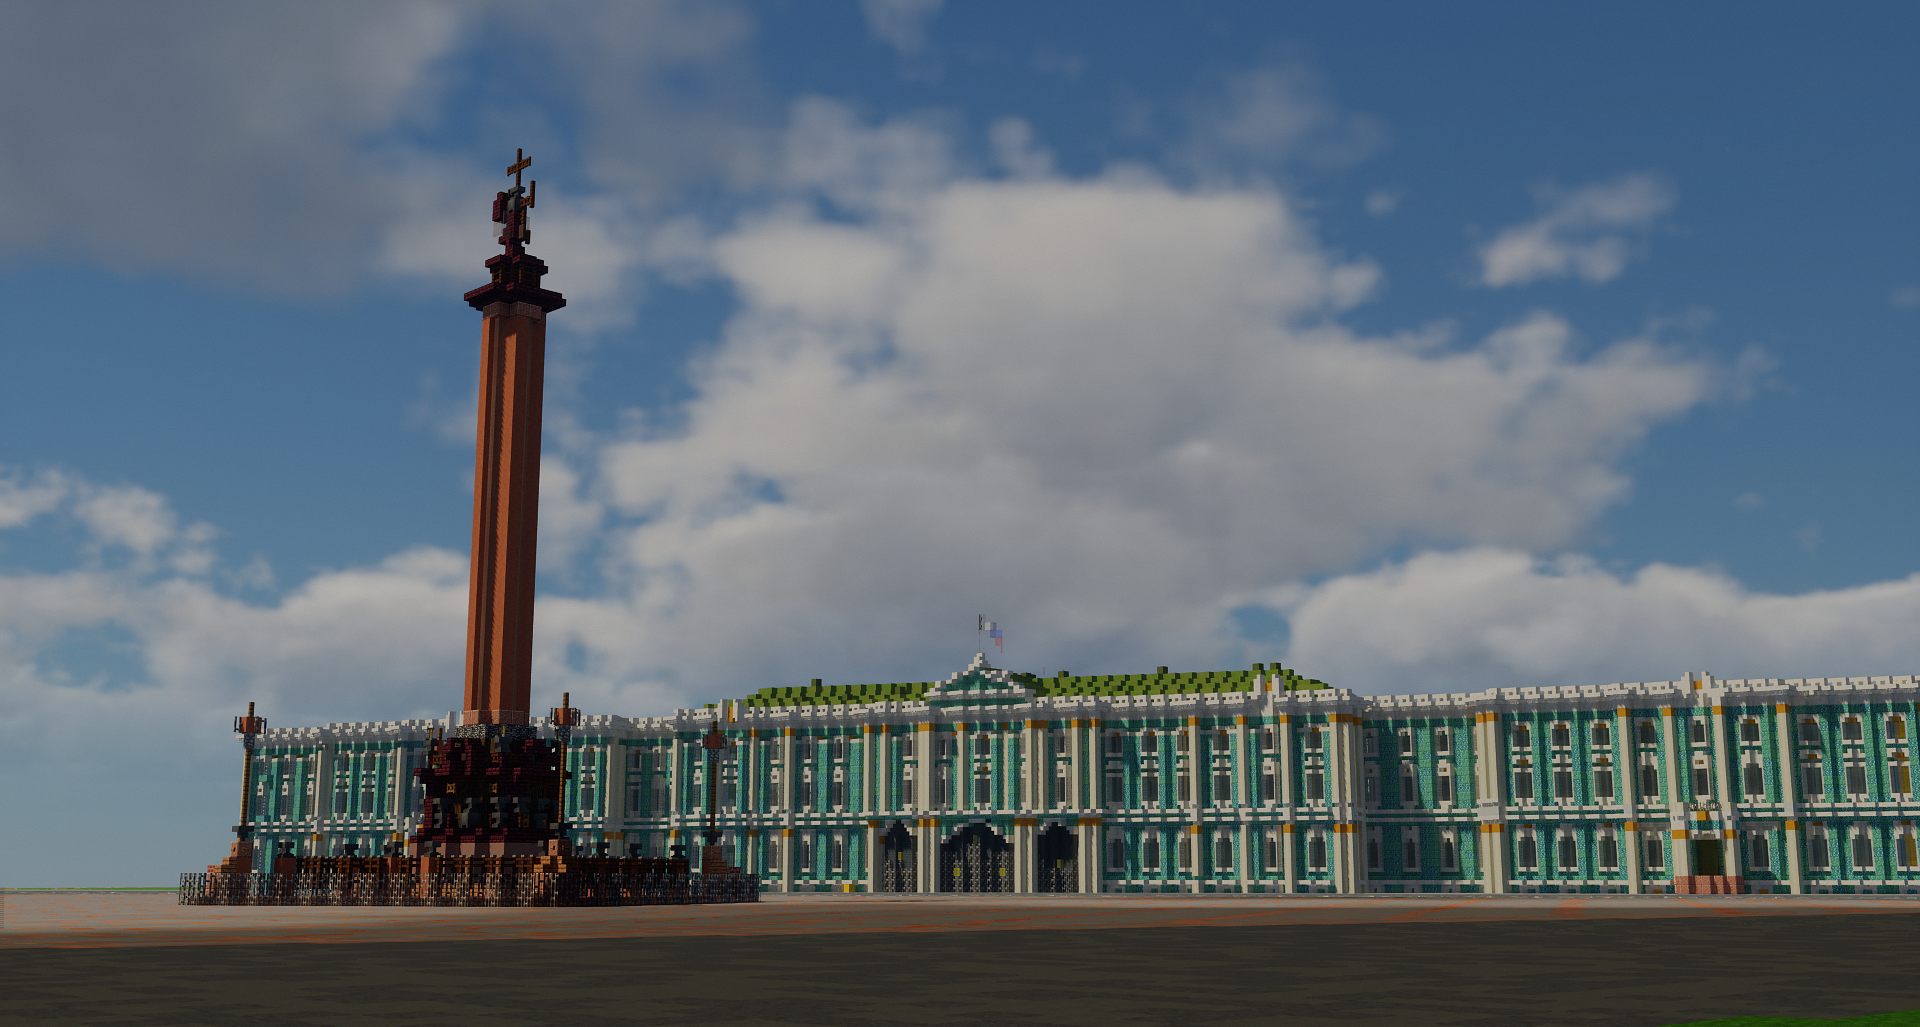 Saint Petersburg in Minecraft - My, Saint Petersburg, Minecraft, Russia, Town, Building, Travels, Games, Palace Square, , Peter-Pavel's Fortress, Cities of Russia, Longpost, Interesting, Video